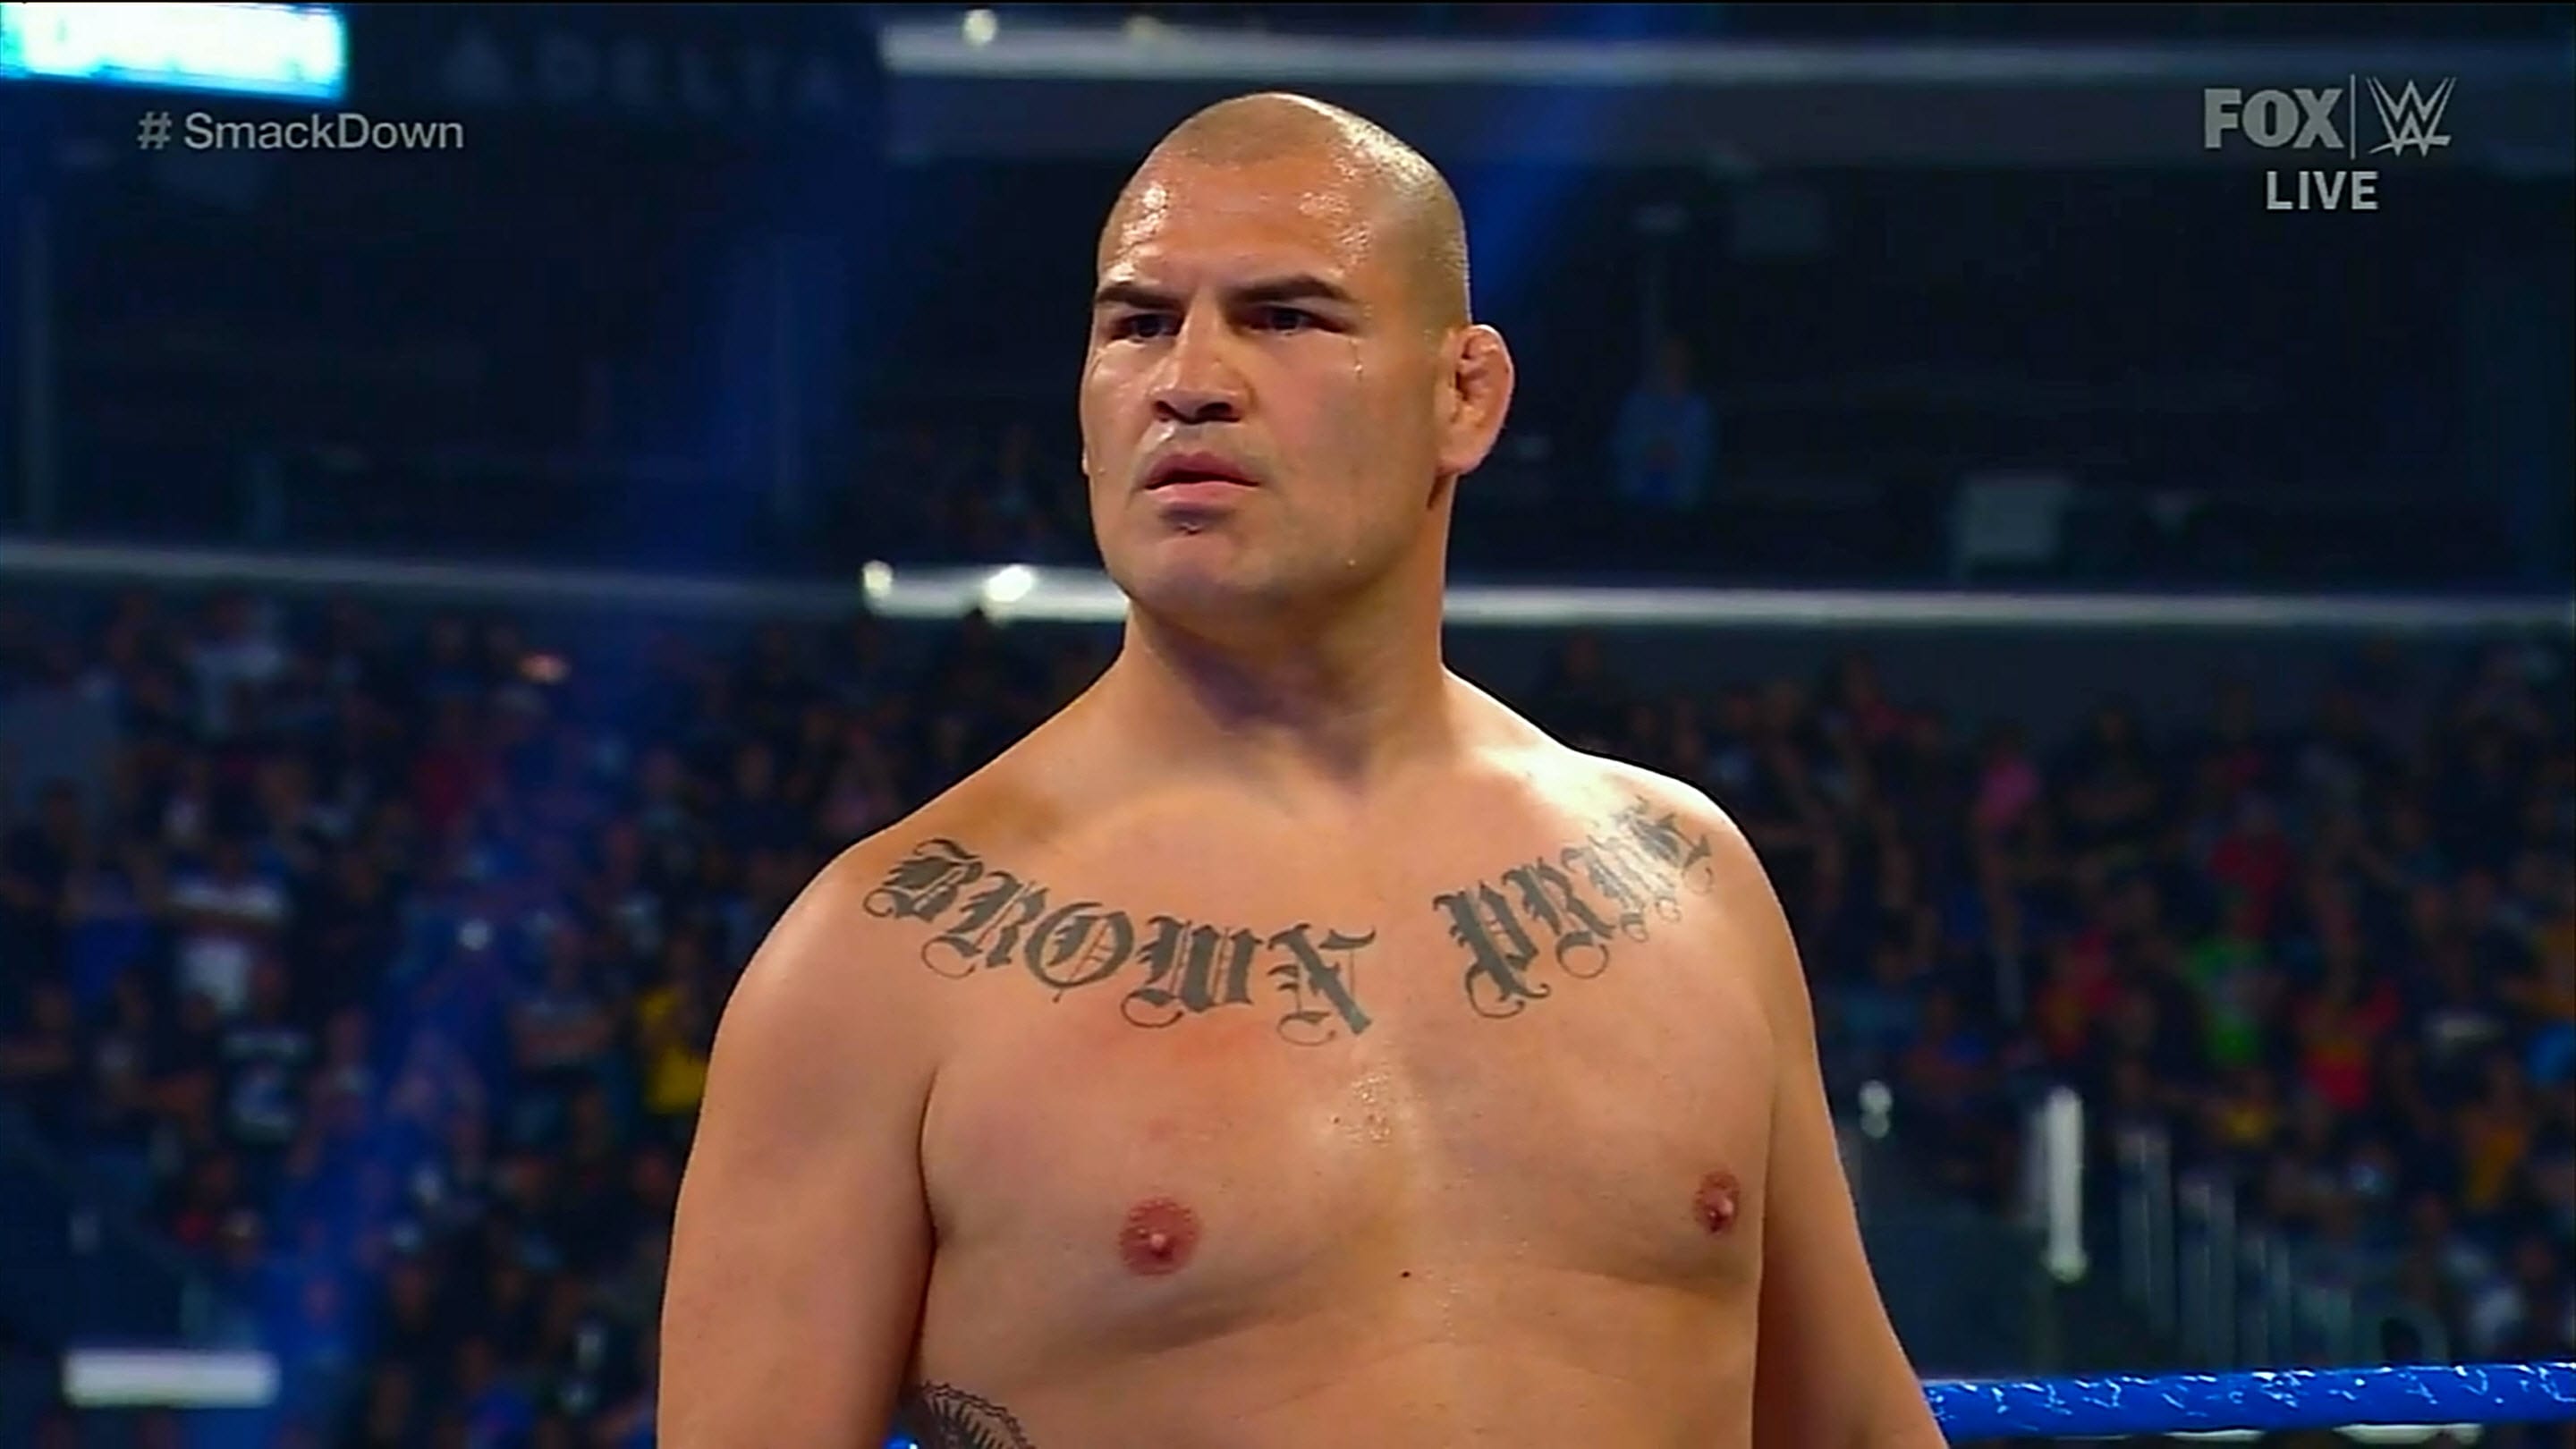 Cain Velasquez Appears On Wwe Fox Smackdown Takes Out Brock